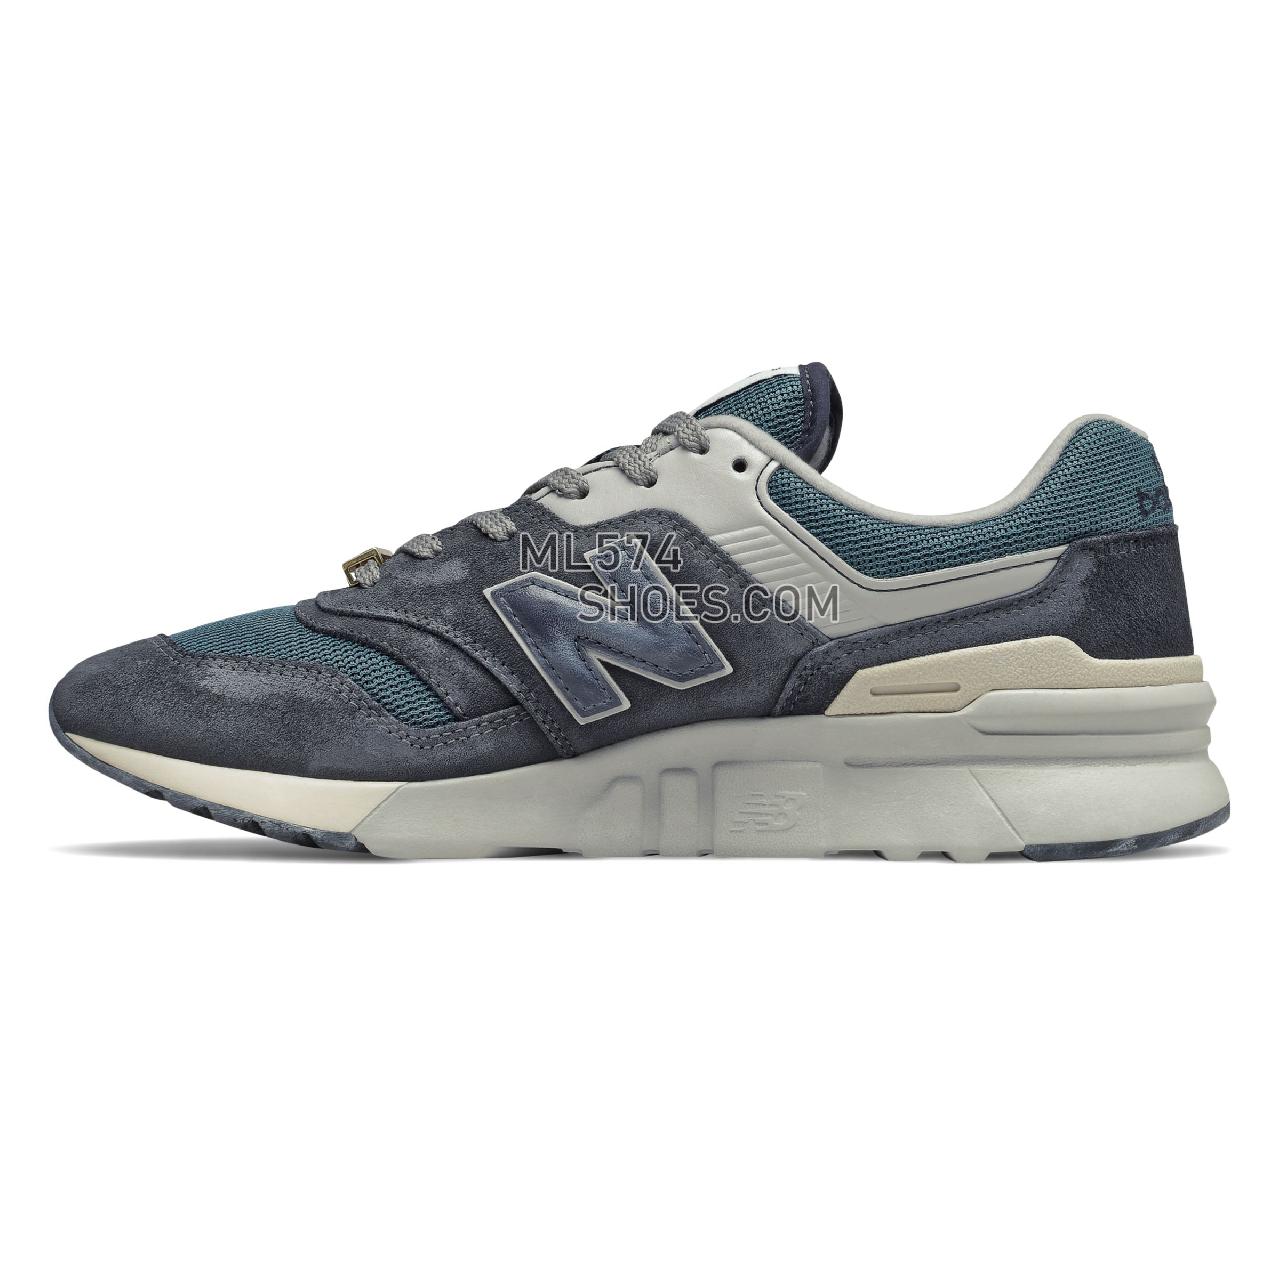 New Balance 997H - Men's Classic Sneakers - Outerspace with Gold - CM997HGC